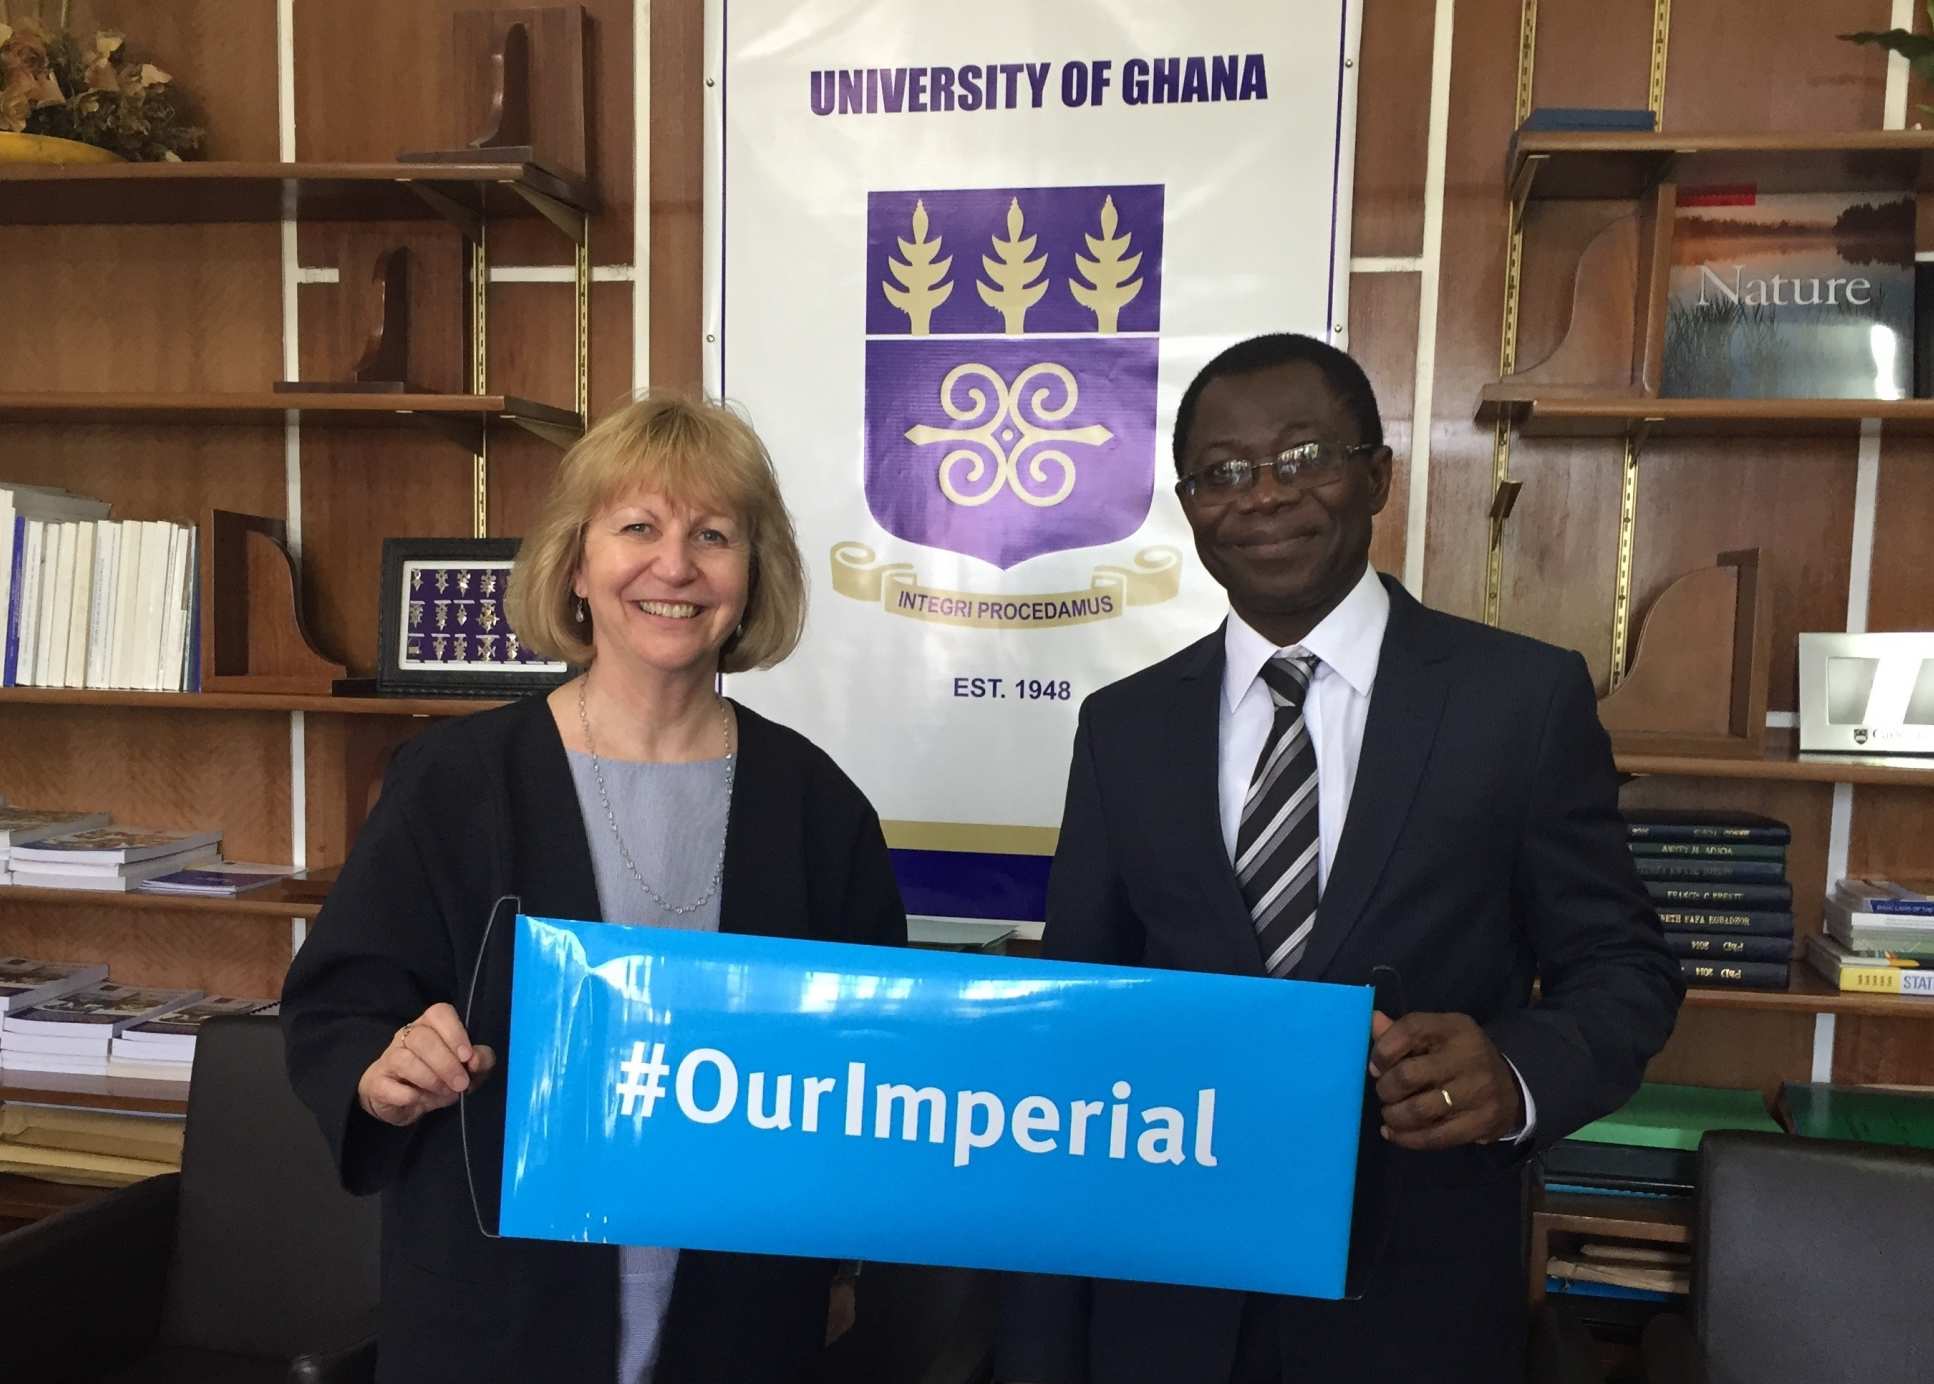 Professor Dallman met with Professor Samuel Kwame Offei, Pro-Vice Chancellor of academic partnerships at the University of Ghana and an Imperial alumnus.